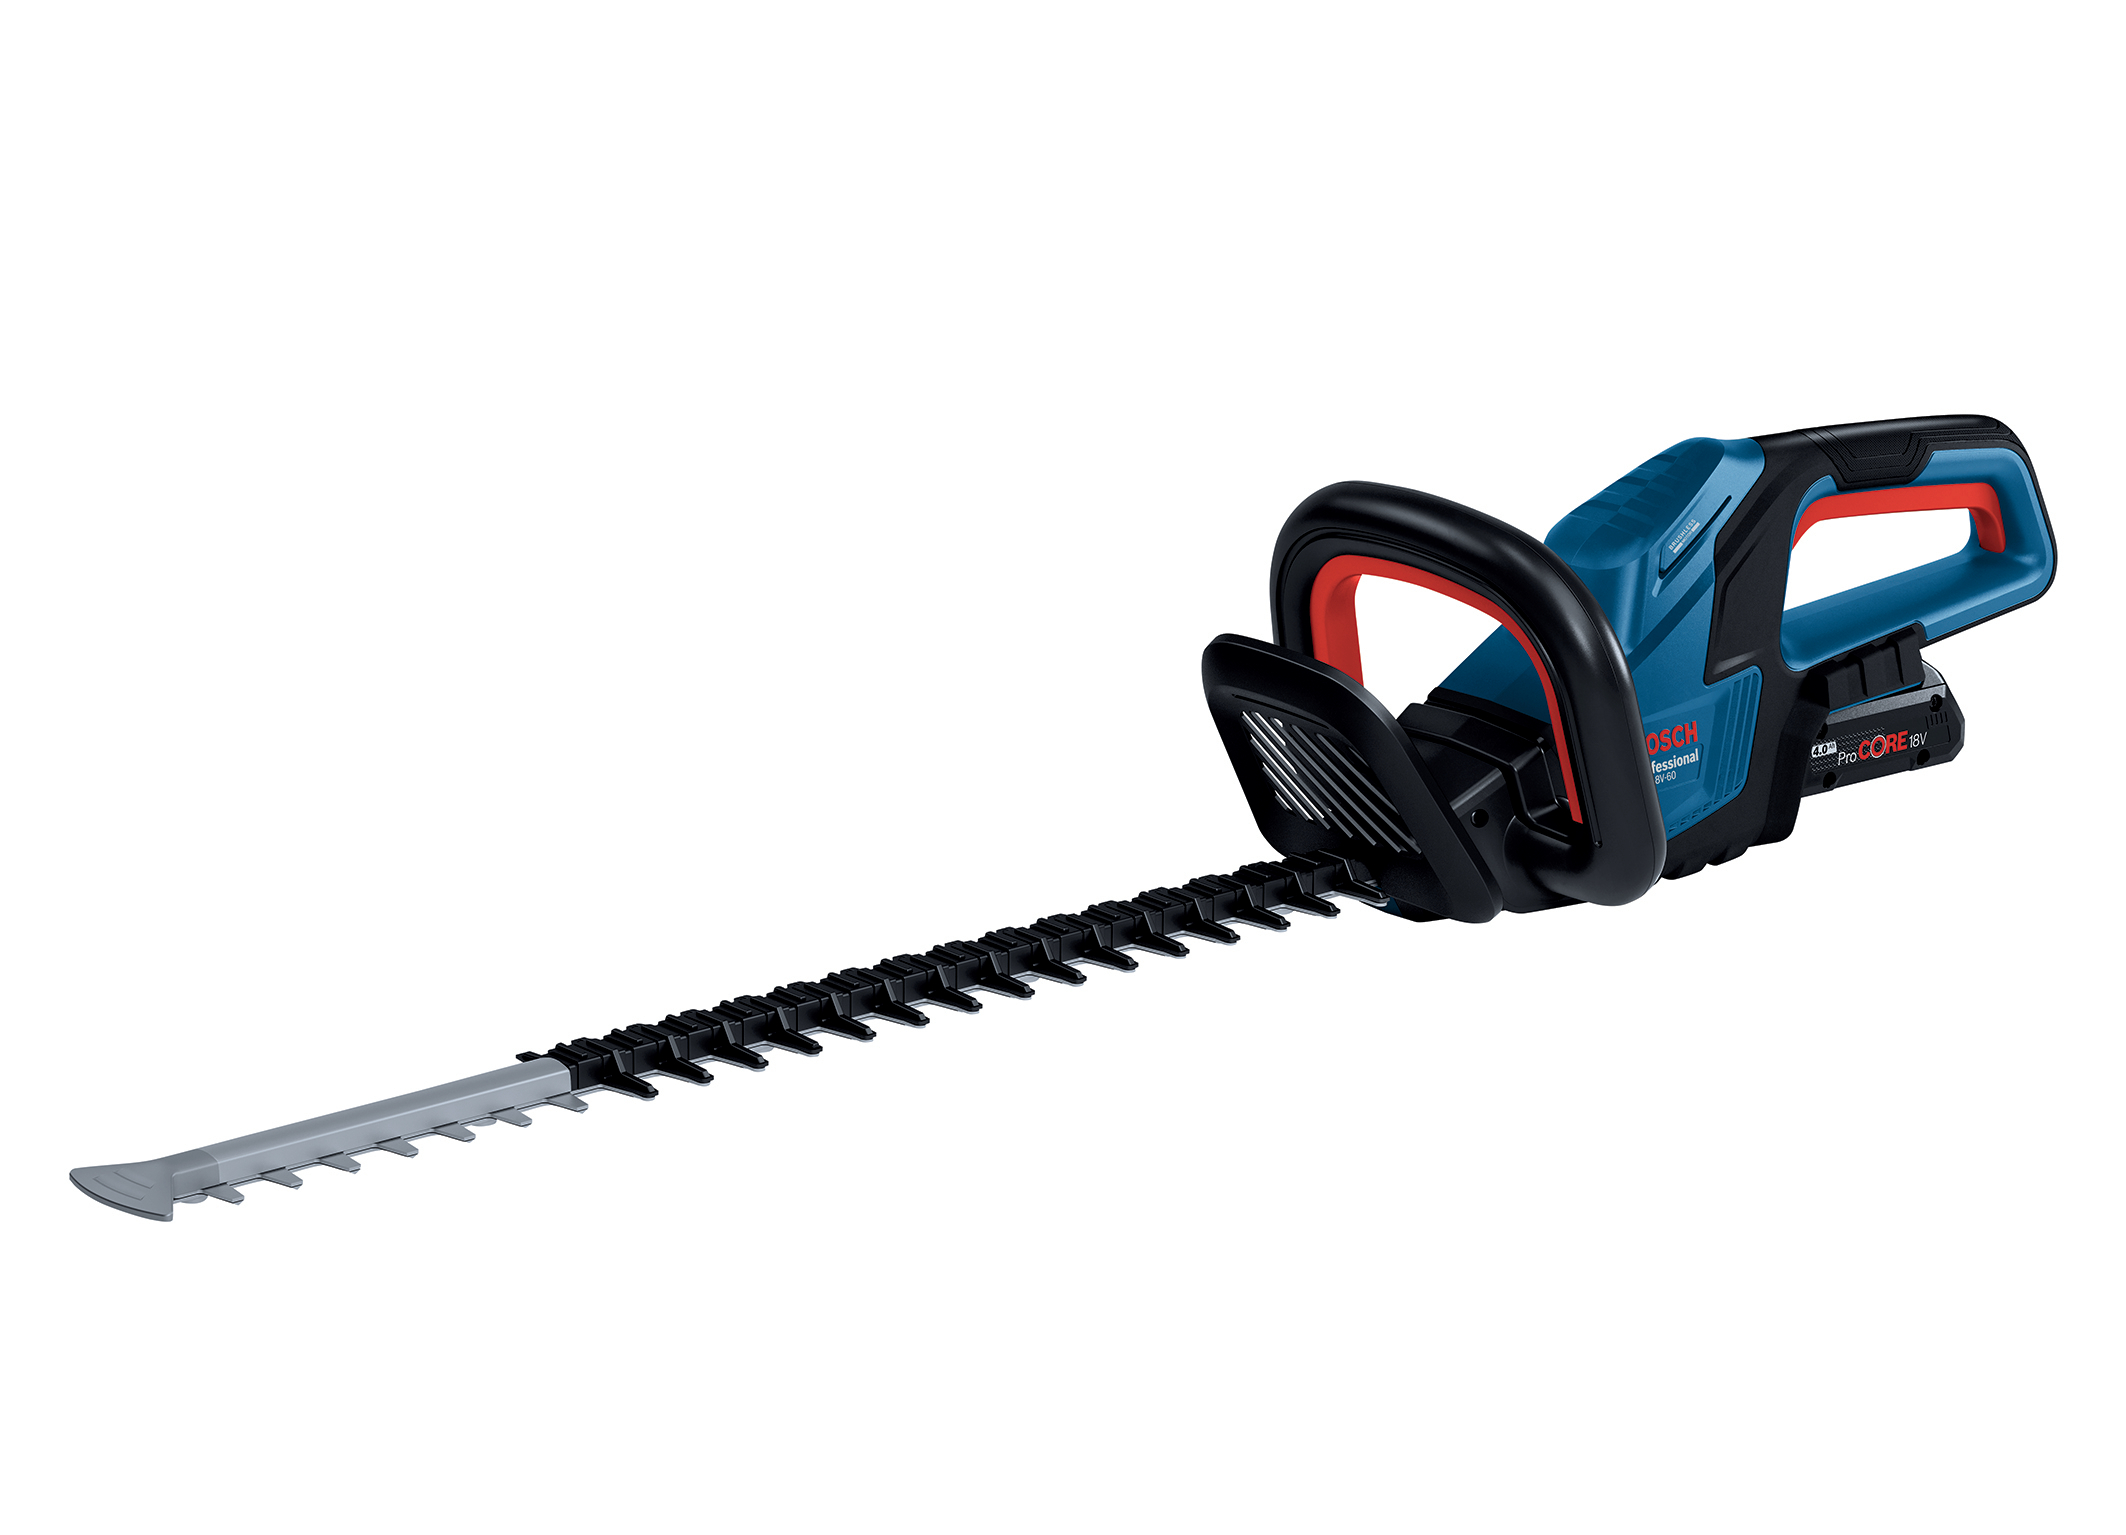 New growth in the Professional 18V System: Professional outdoor equipment like a cordless hedge trimmer from Bosch